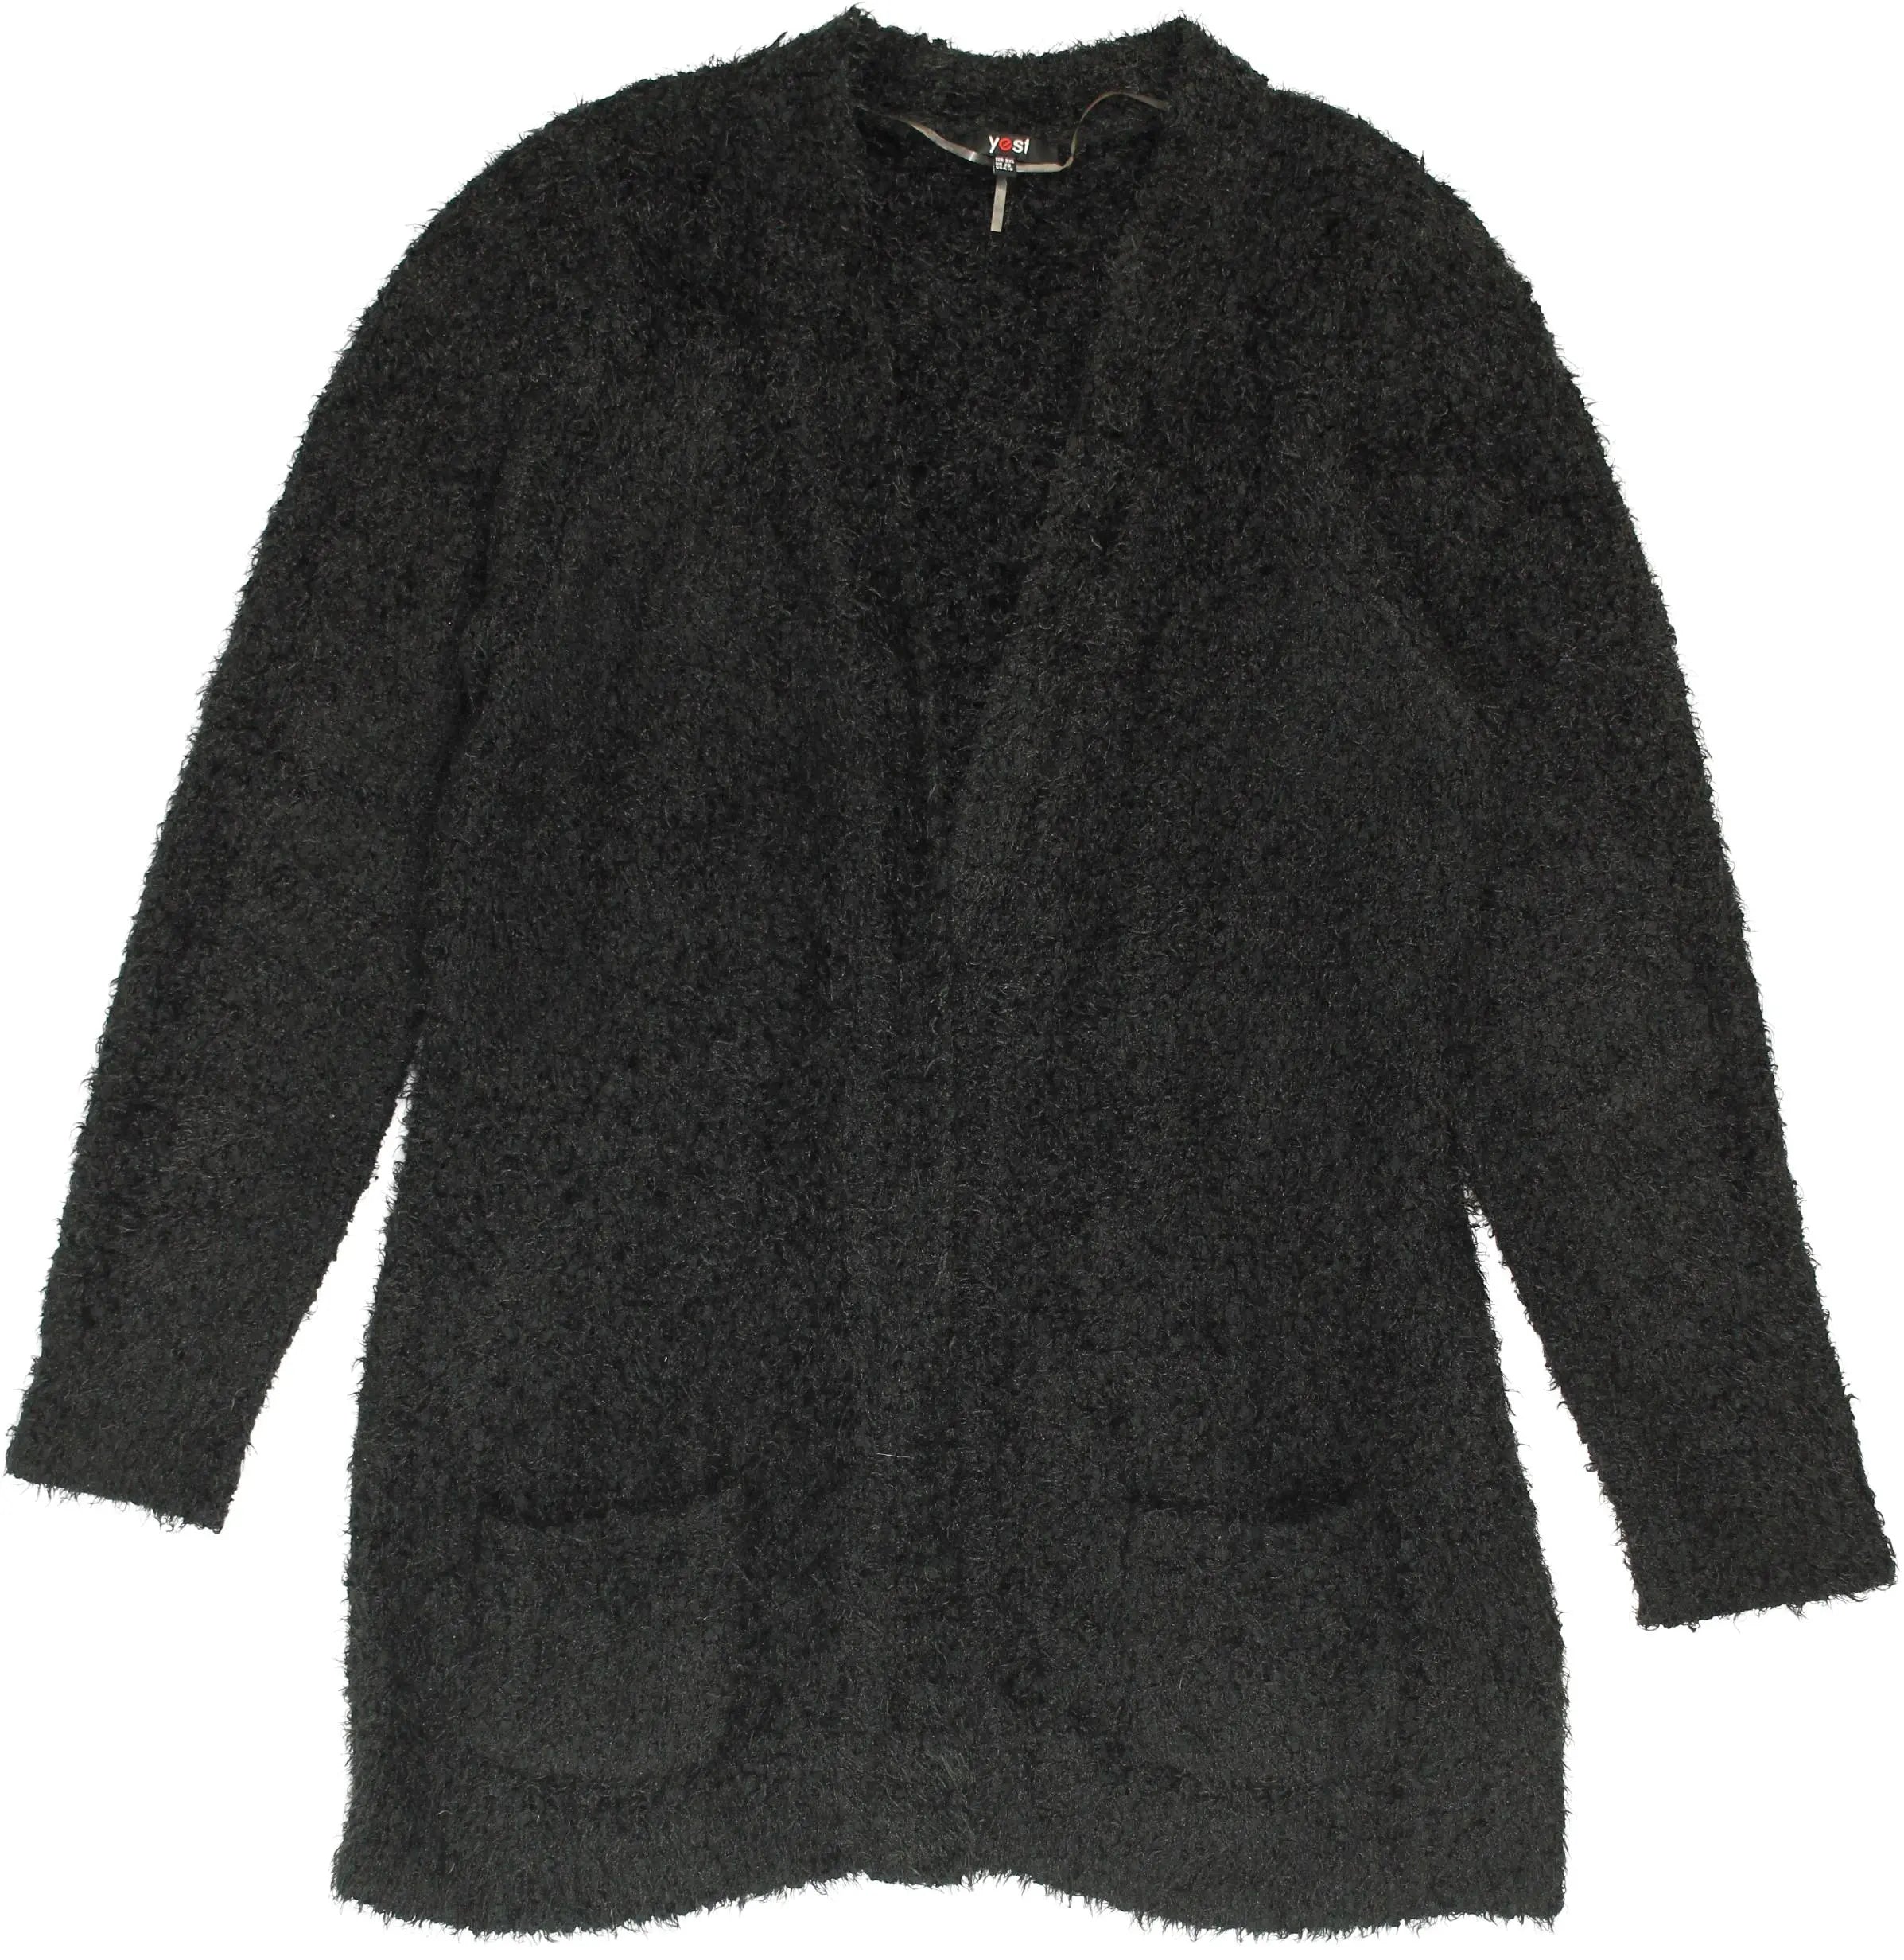 Yest - Fuzzy Black Cardigan- ThriftTale.com - Vintage and second handclothing